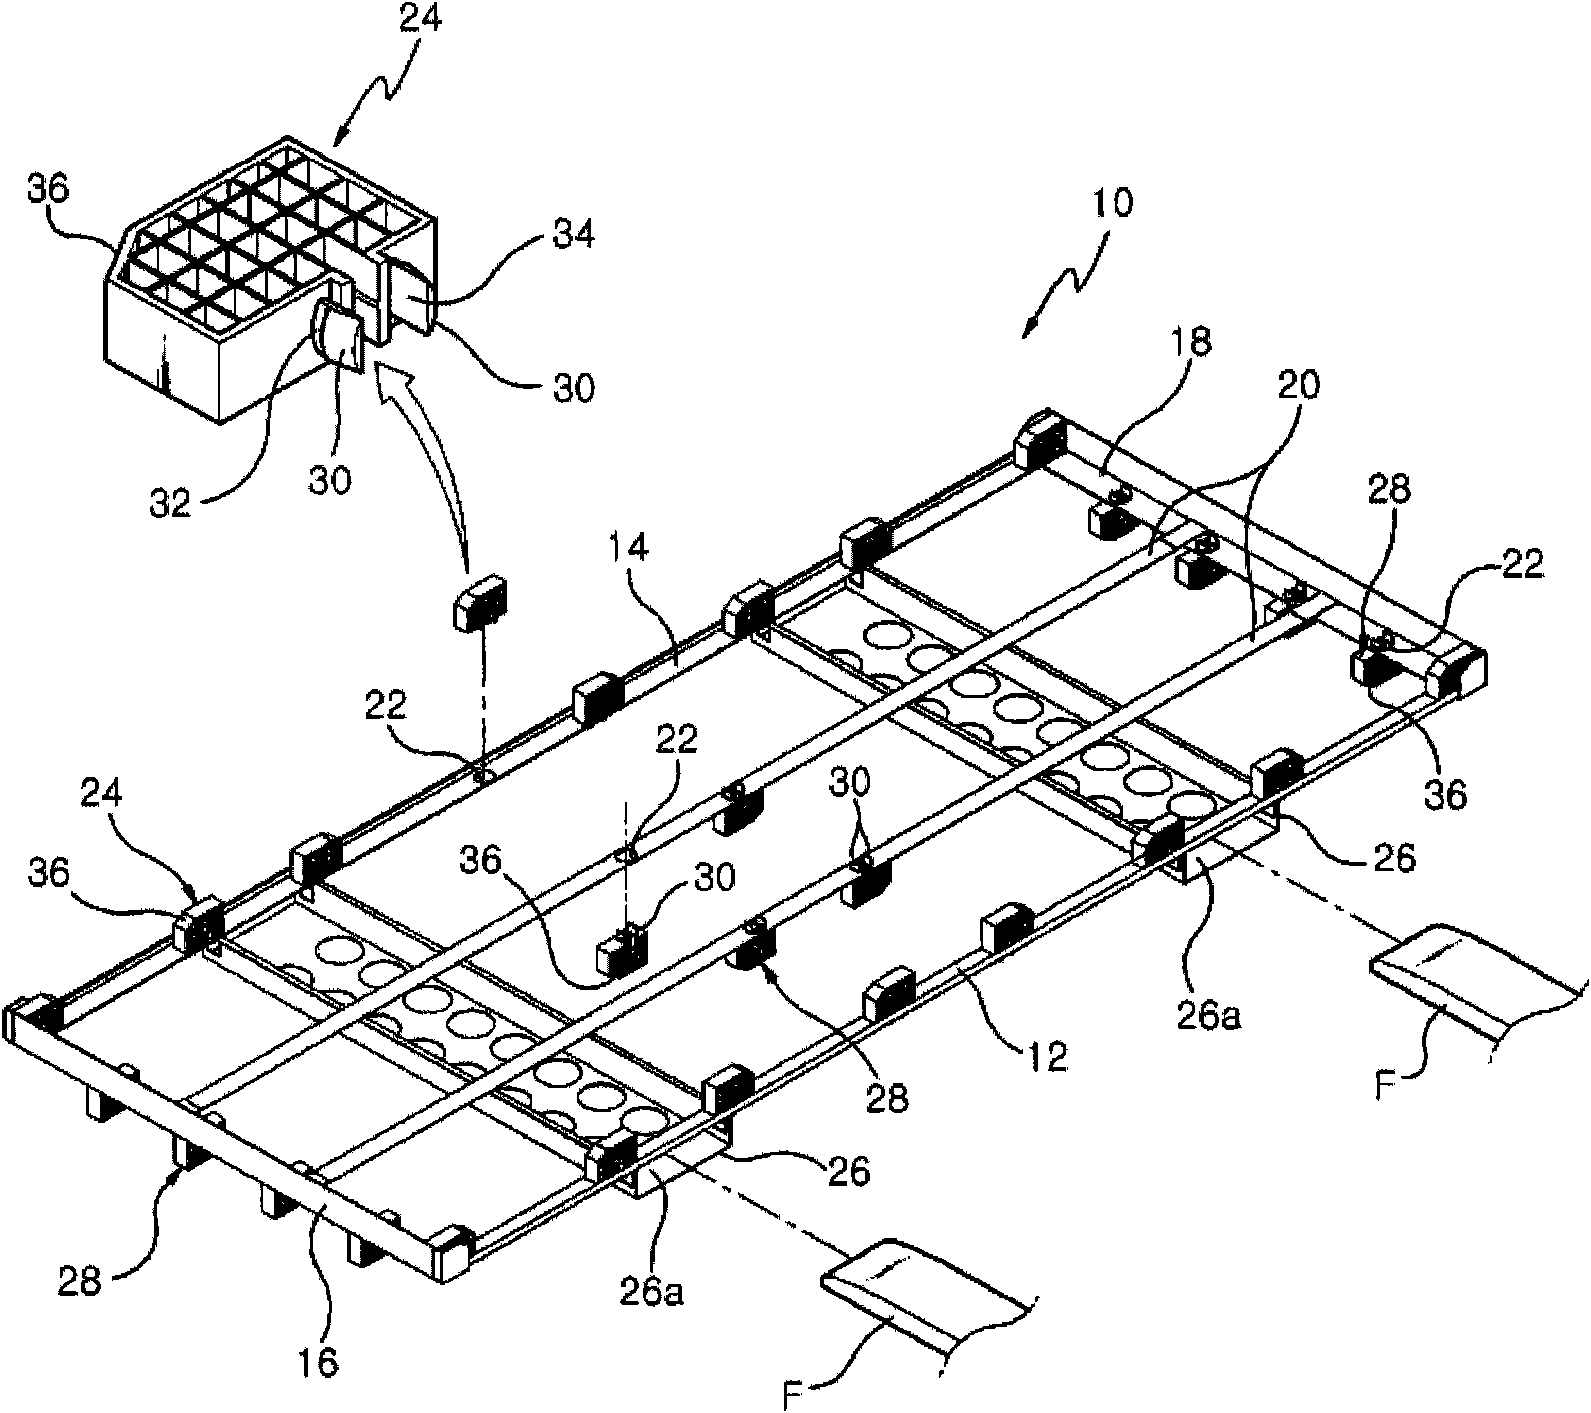 Pallet for transporting drums